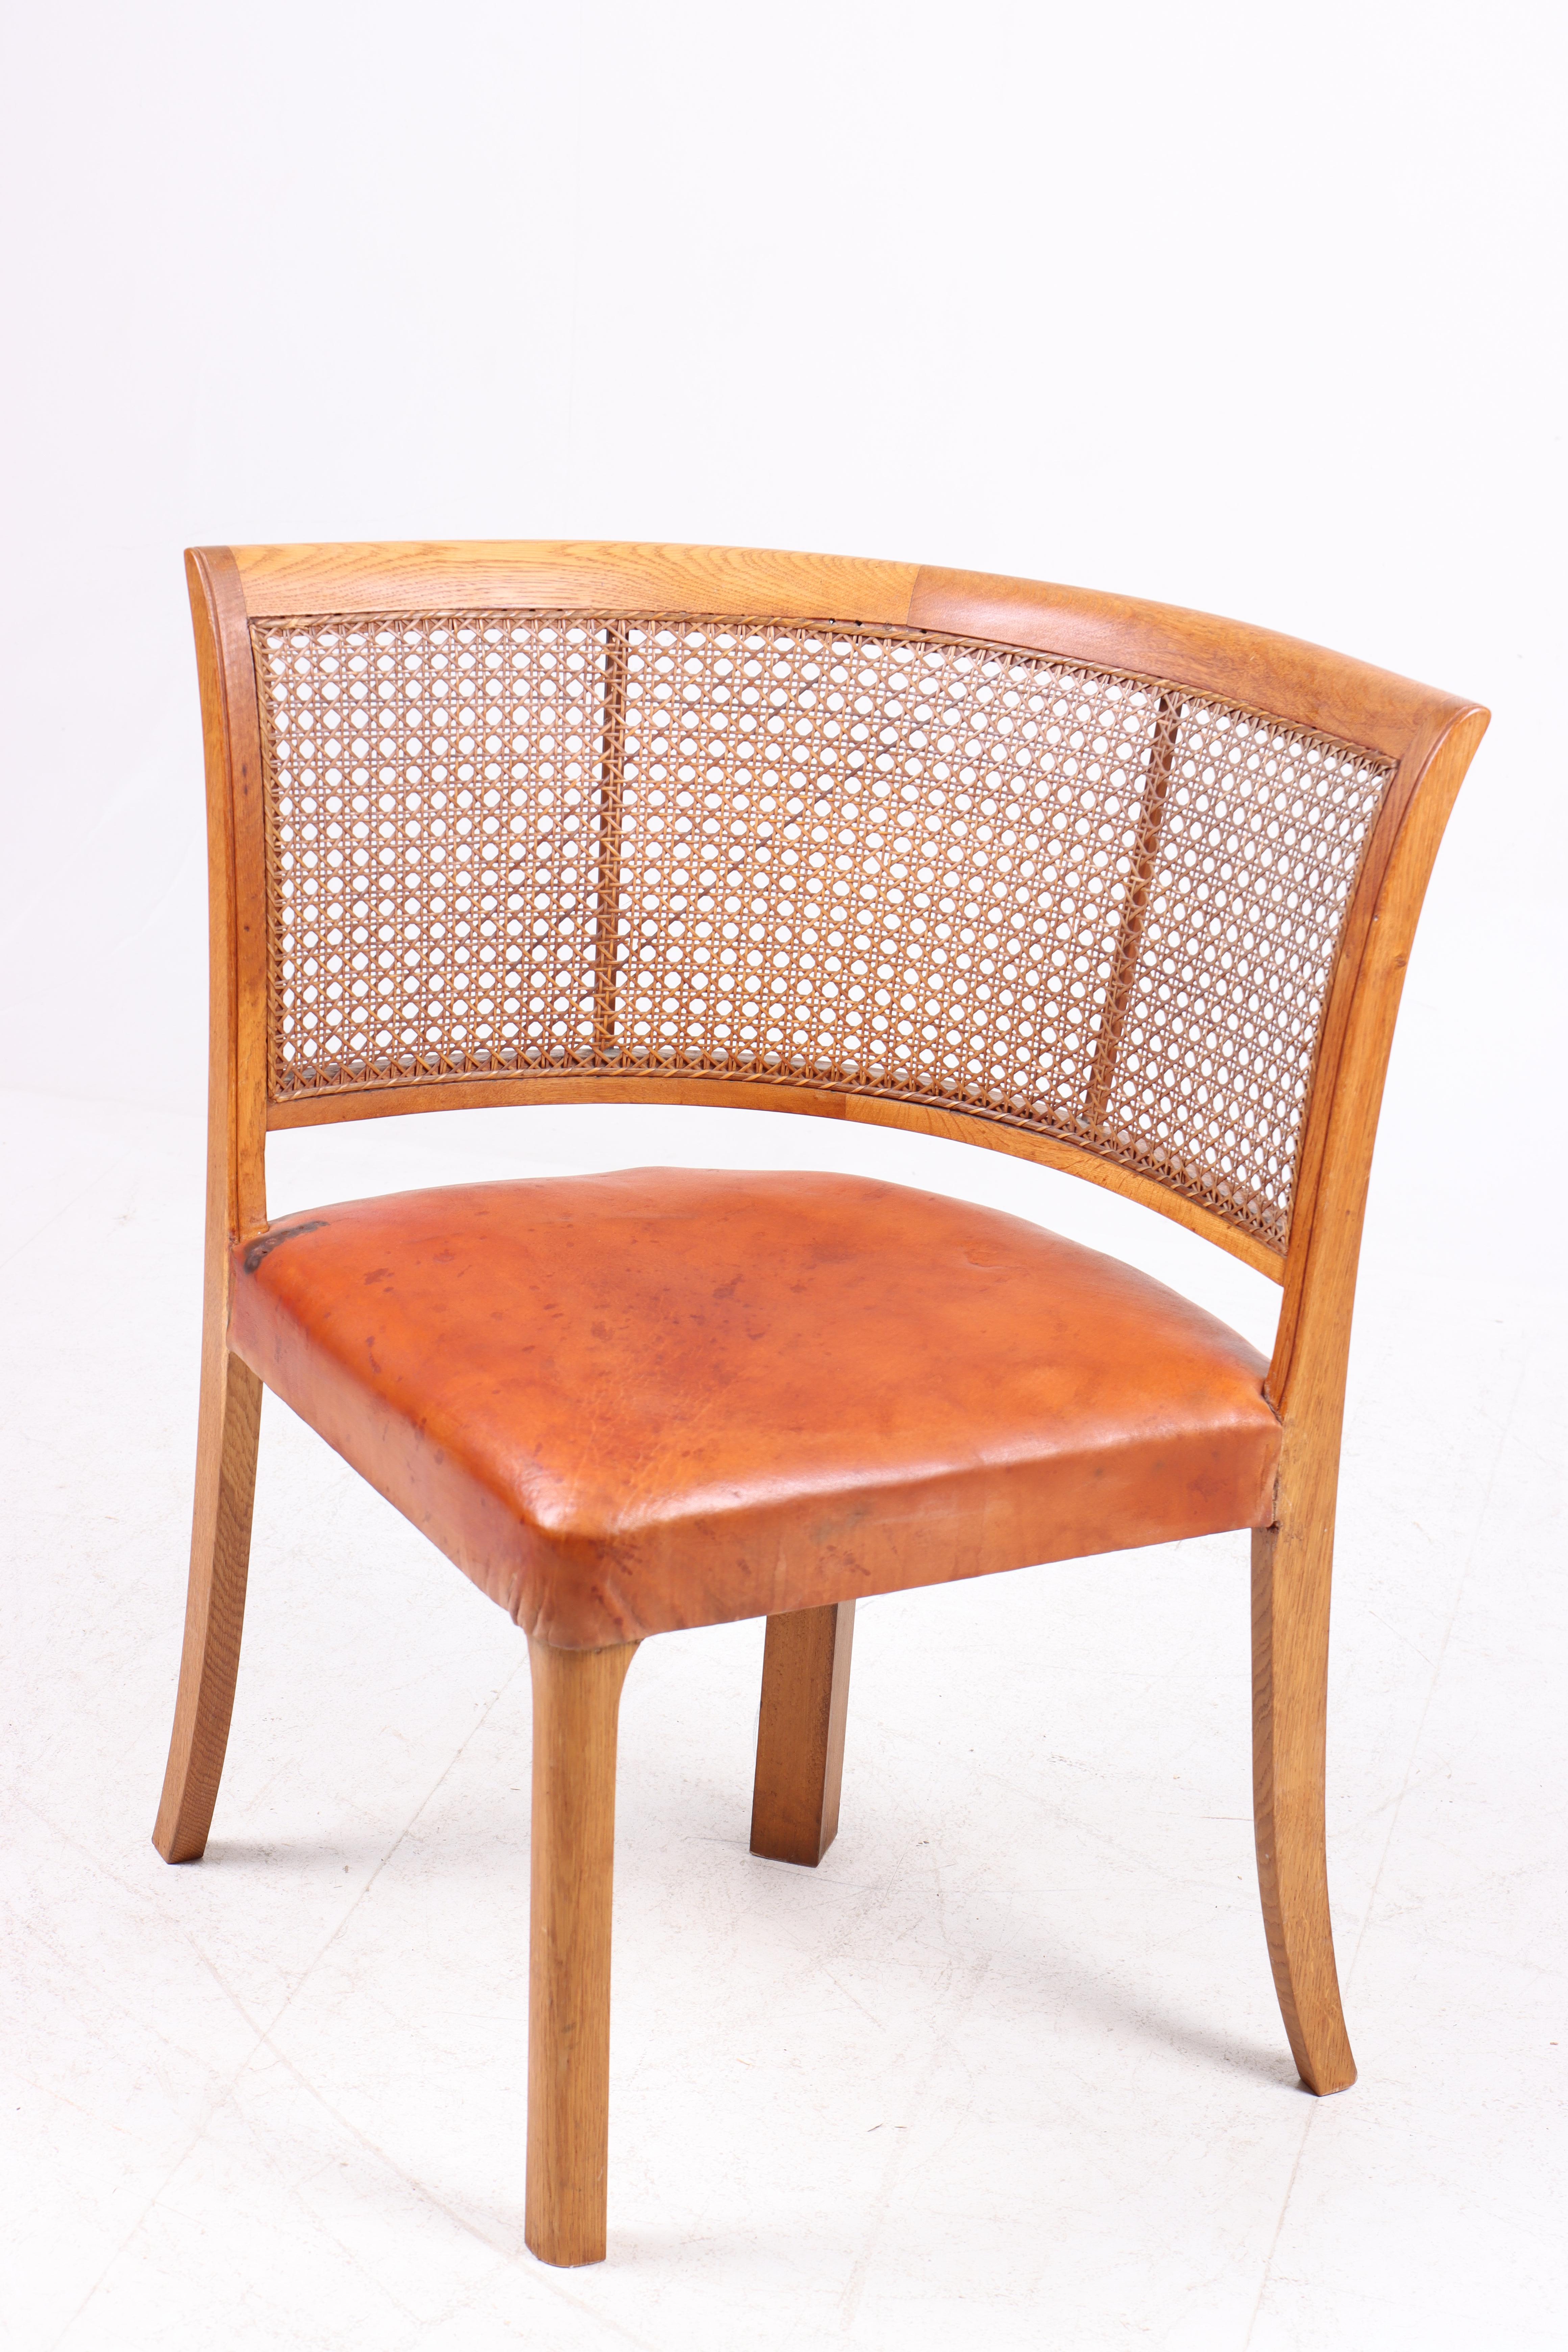 Rare side chair designed and made by Danish cabinetmaker, great condition.